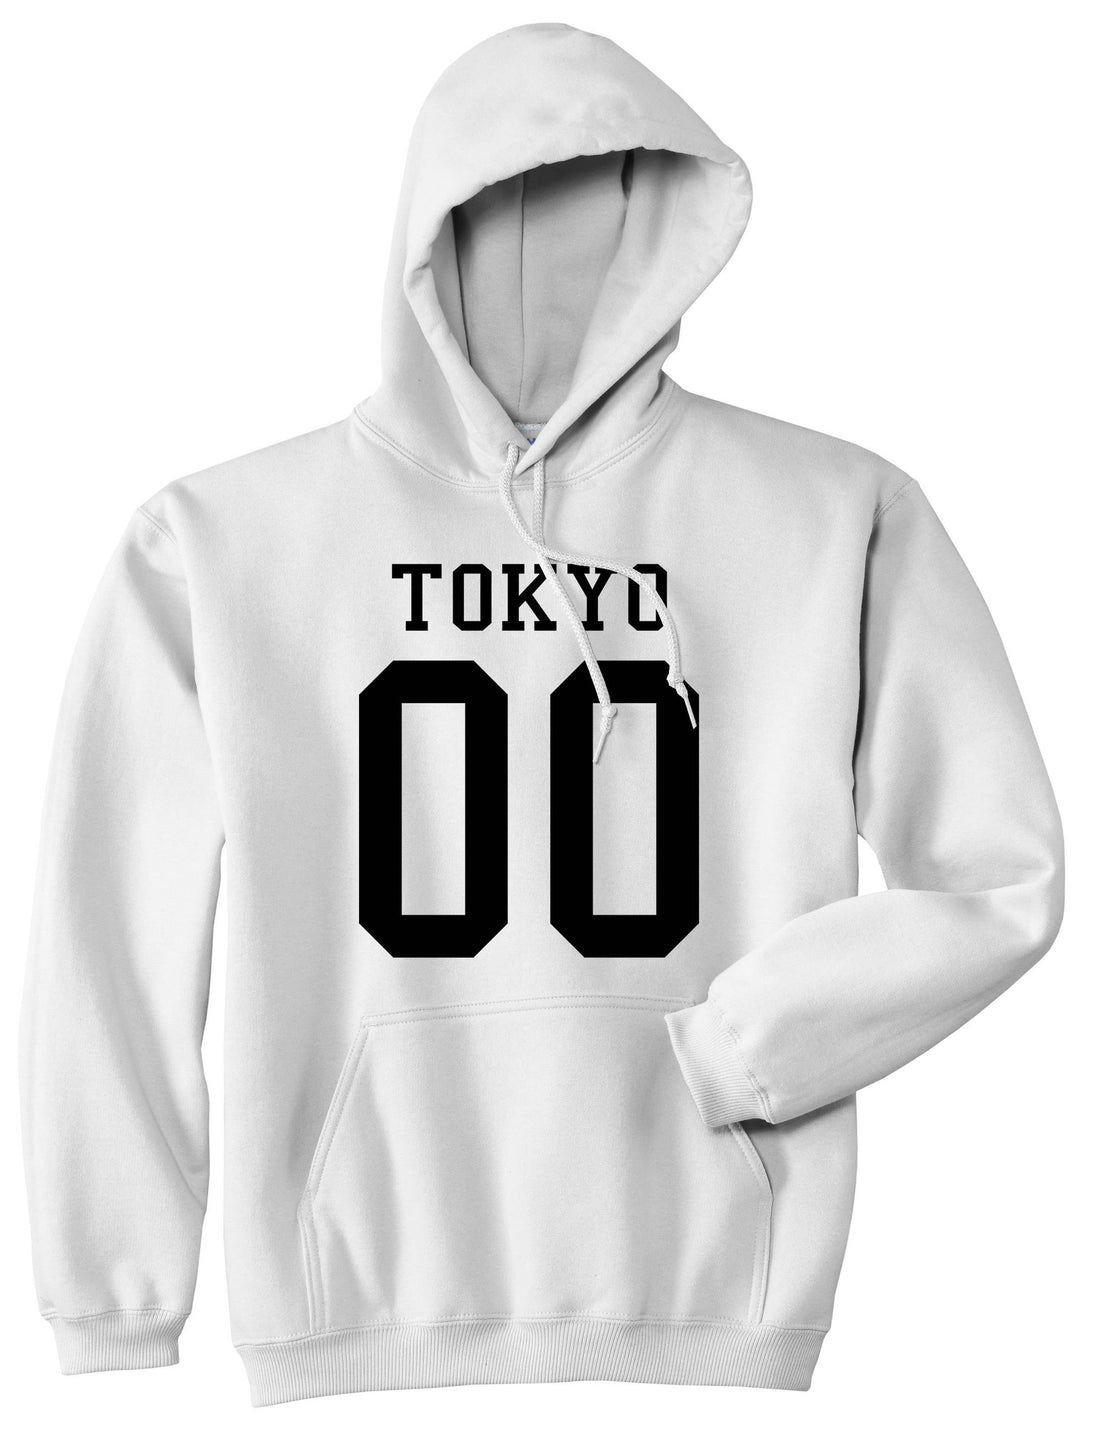 Tokyo Team 00 Jersey Japan Pullover Hoodie in White By Kings Of NY